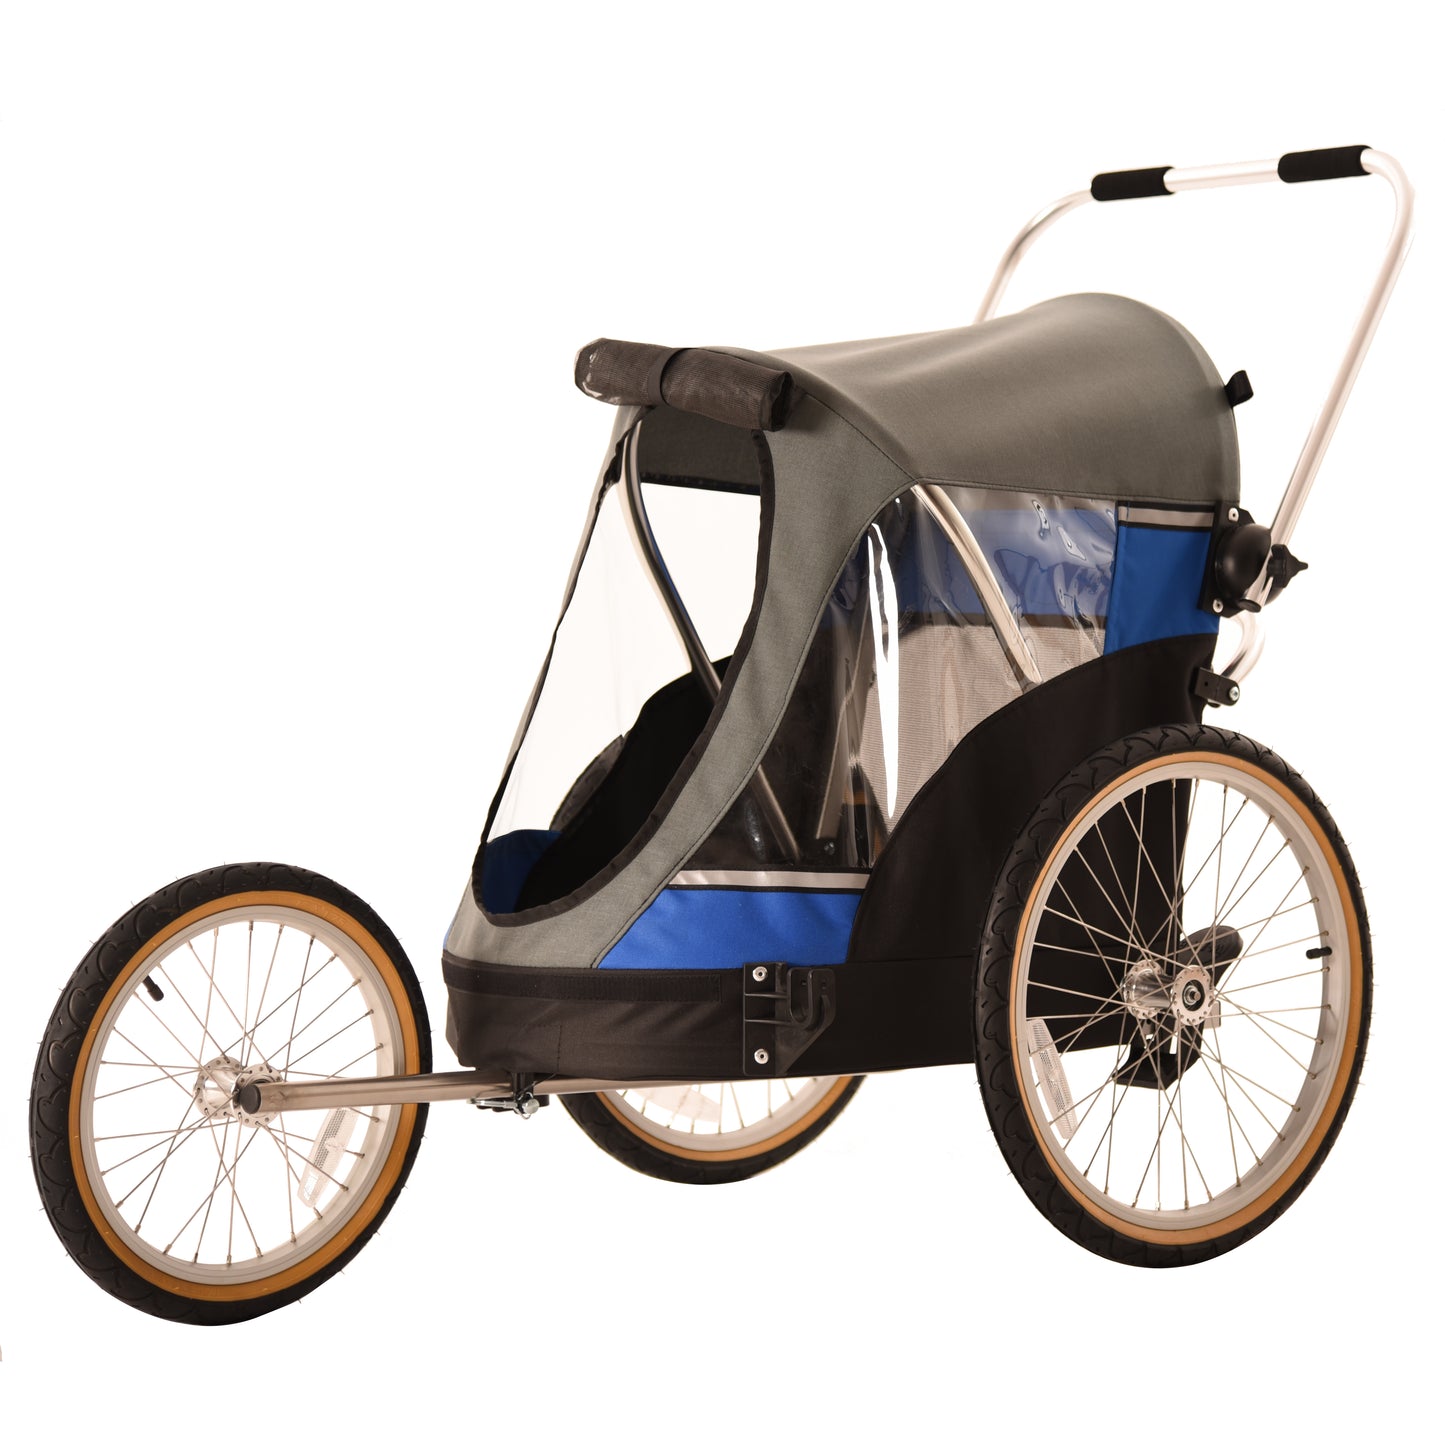 Wagalong Pet Trailer - Includes Stroller and Jogging Kit - Blue/Grey